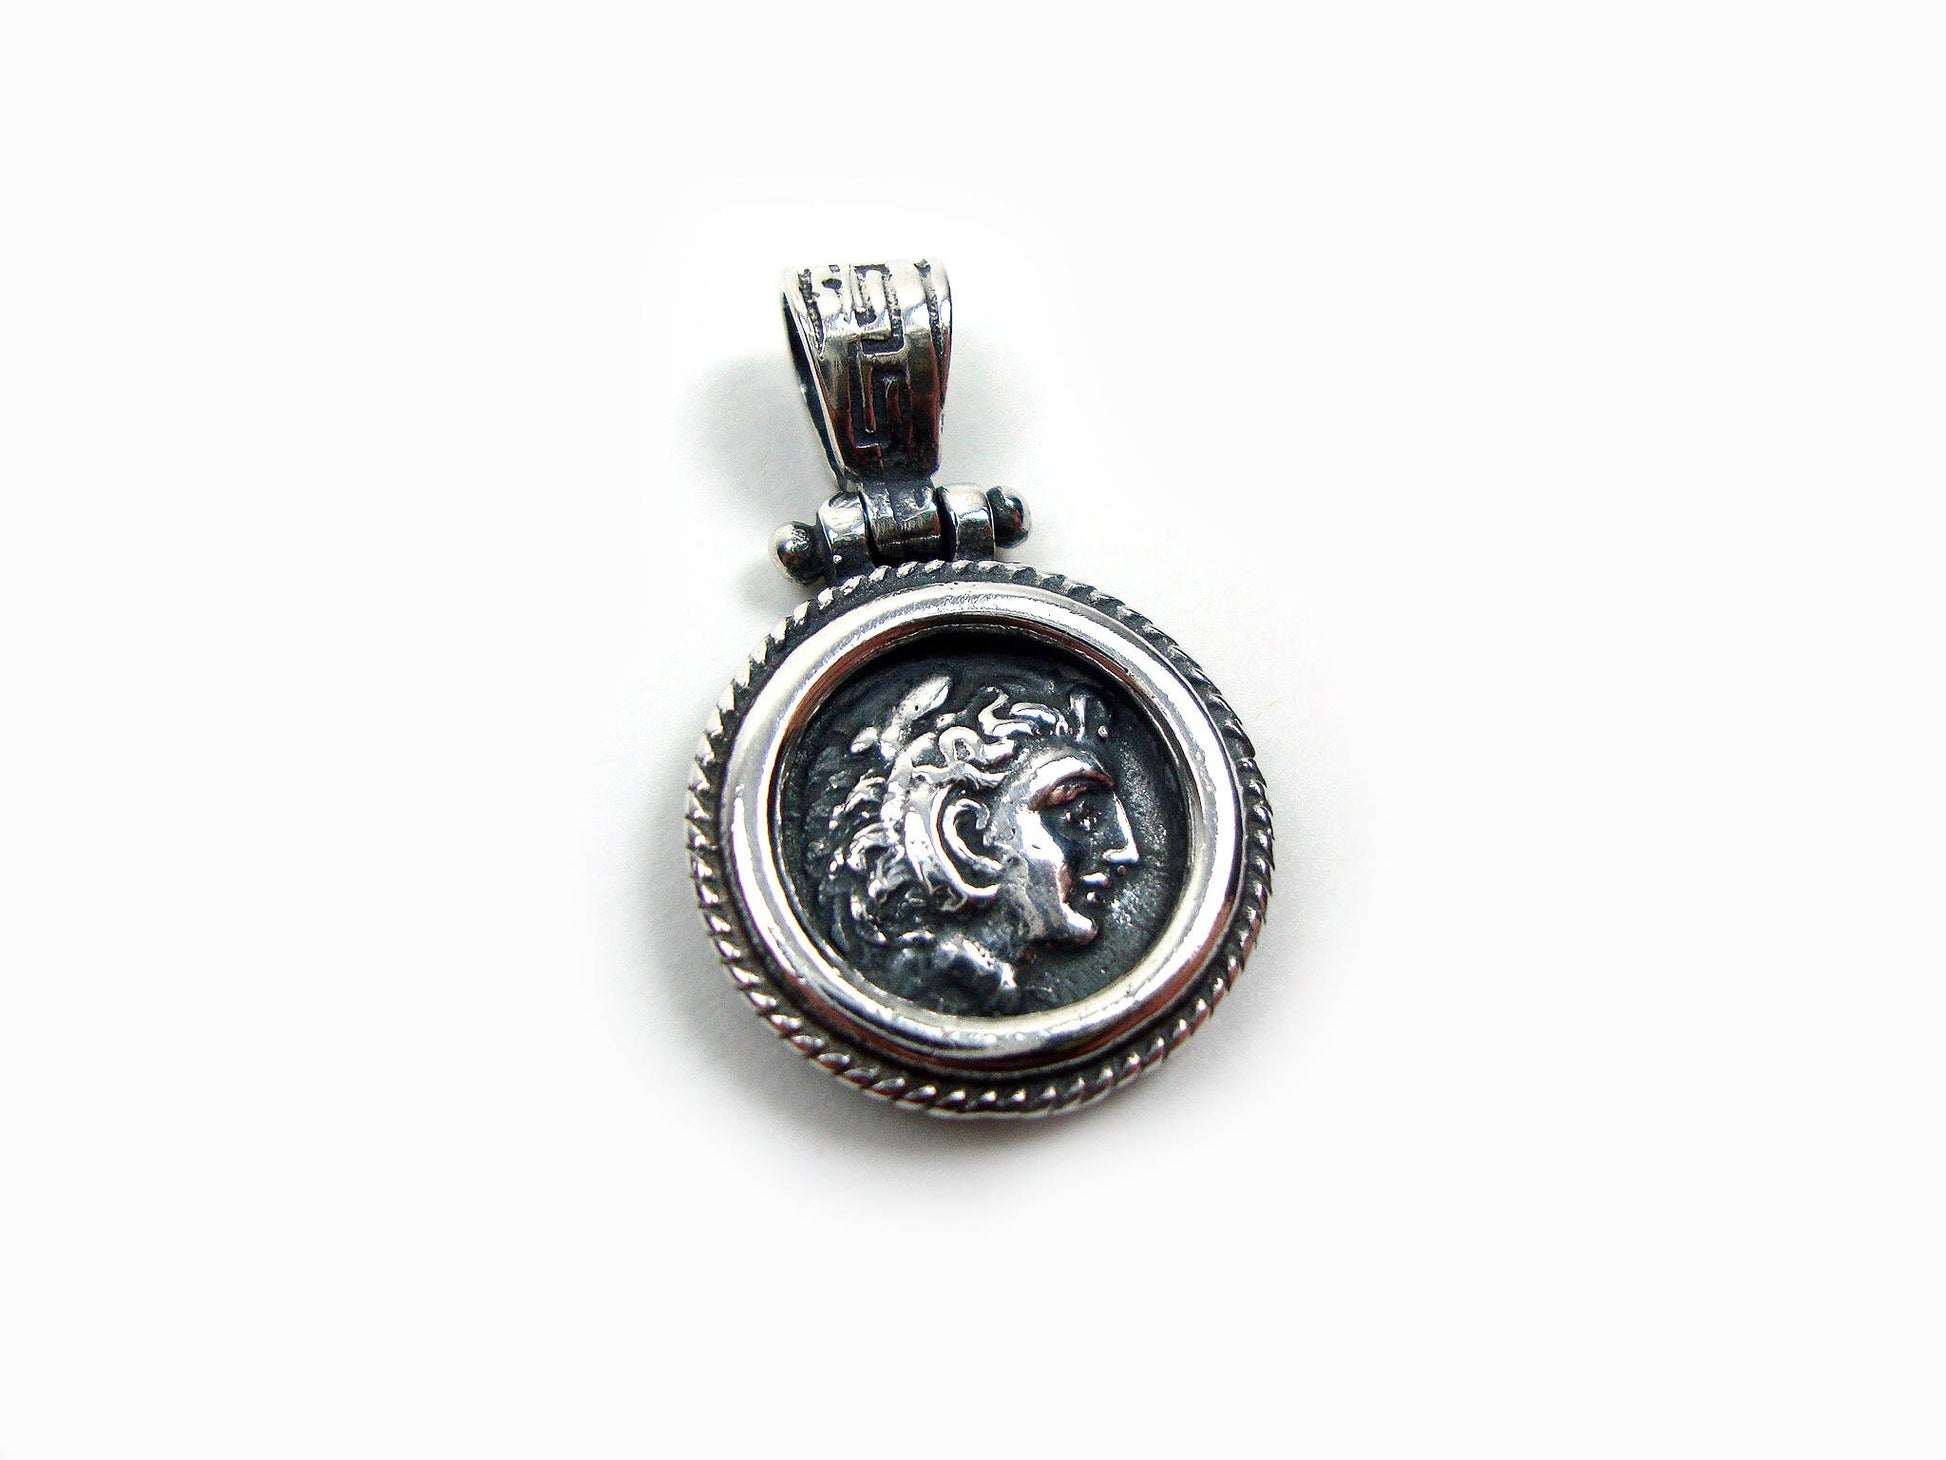 Greek Silver Jewelry: Sterling Silver 925 Pendant featuring an iconic Alexander the Great coin, handcrafted in Greece. Diameter: 17mm.